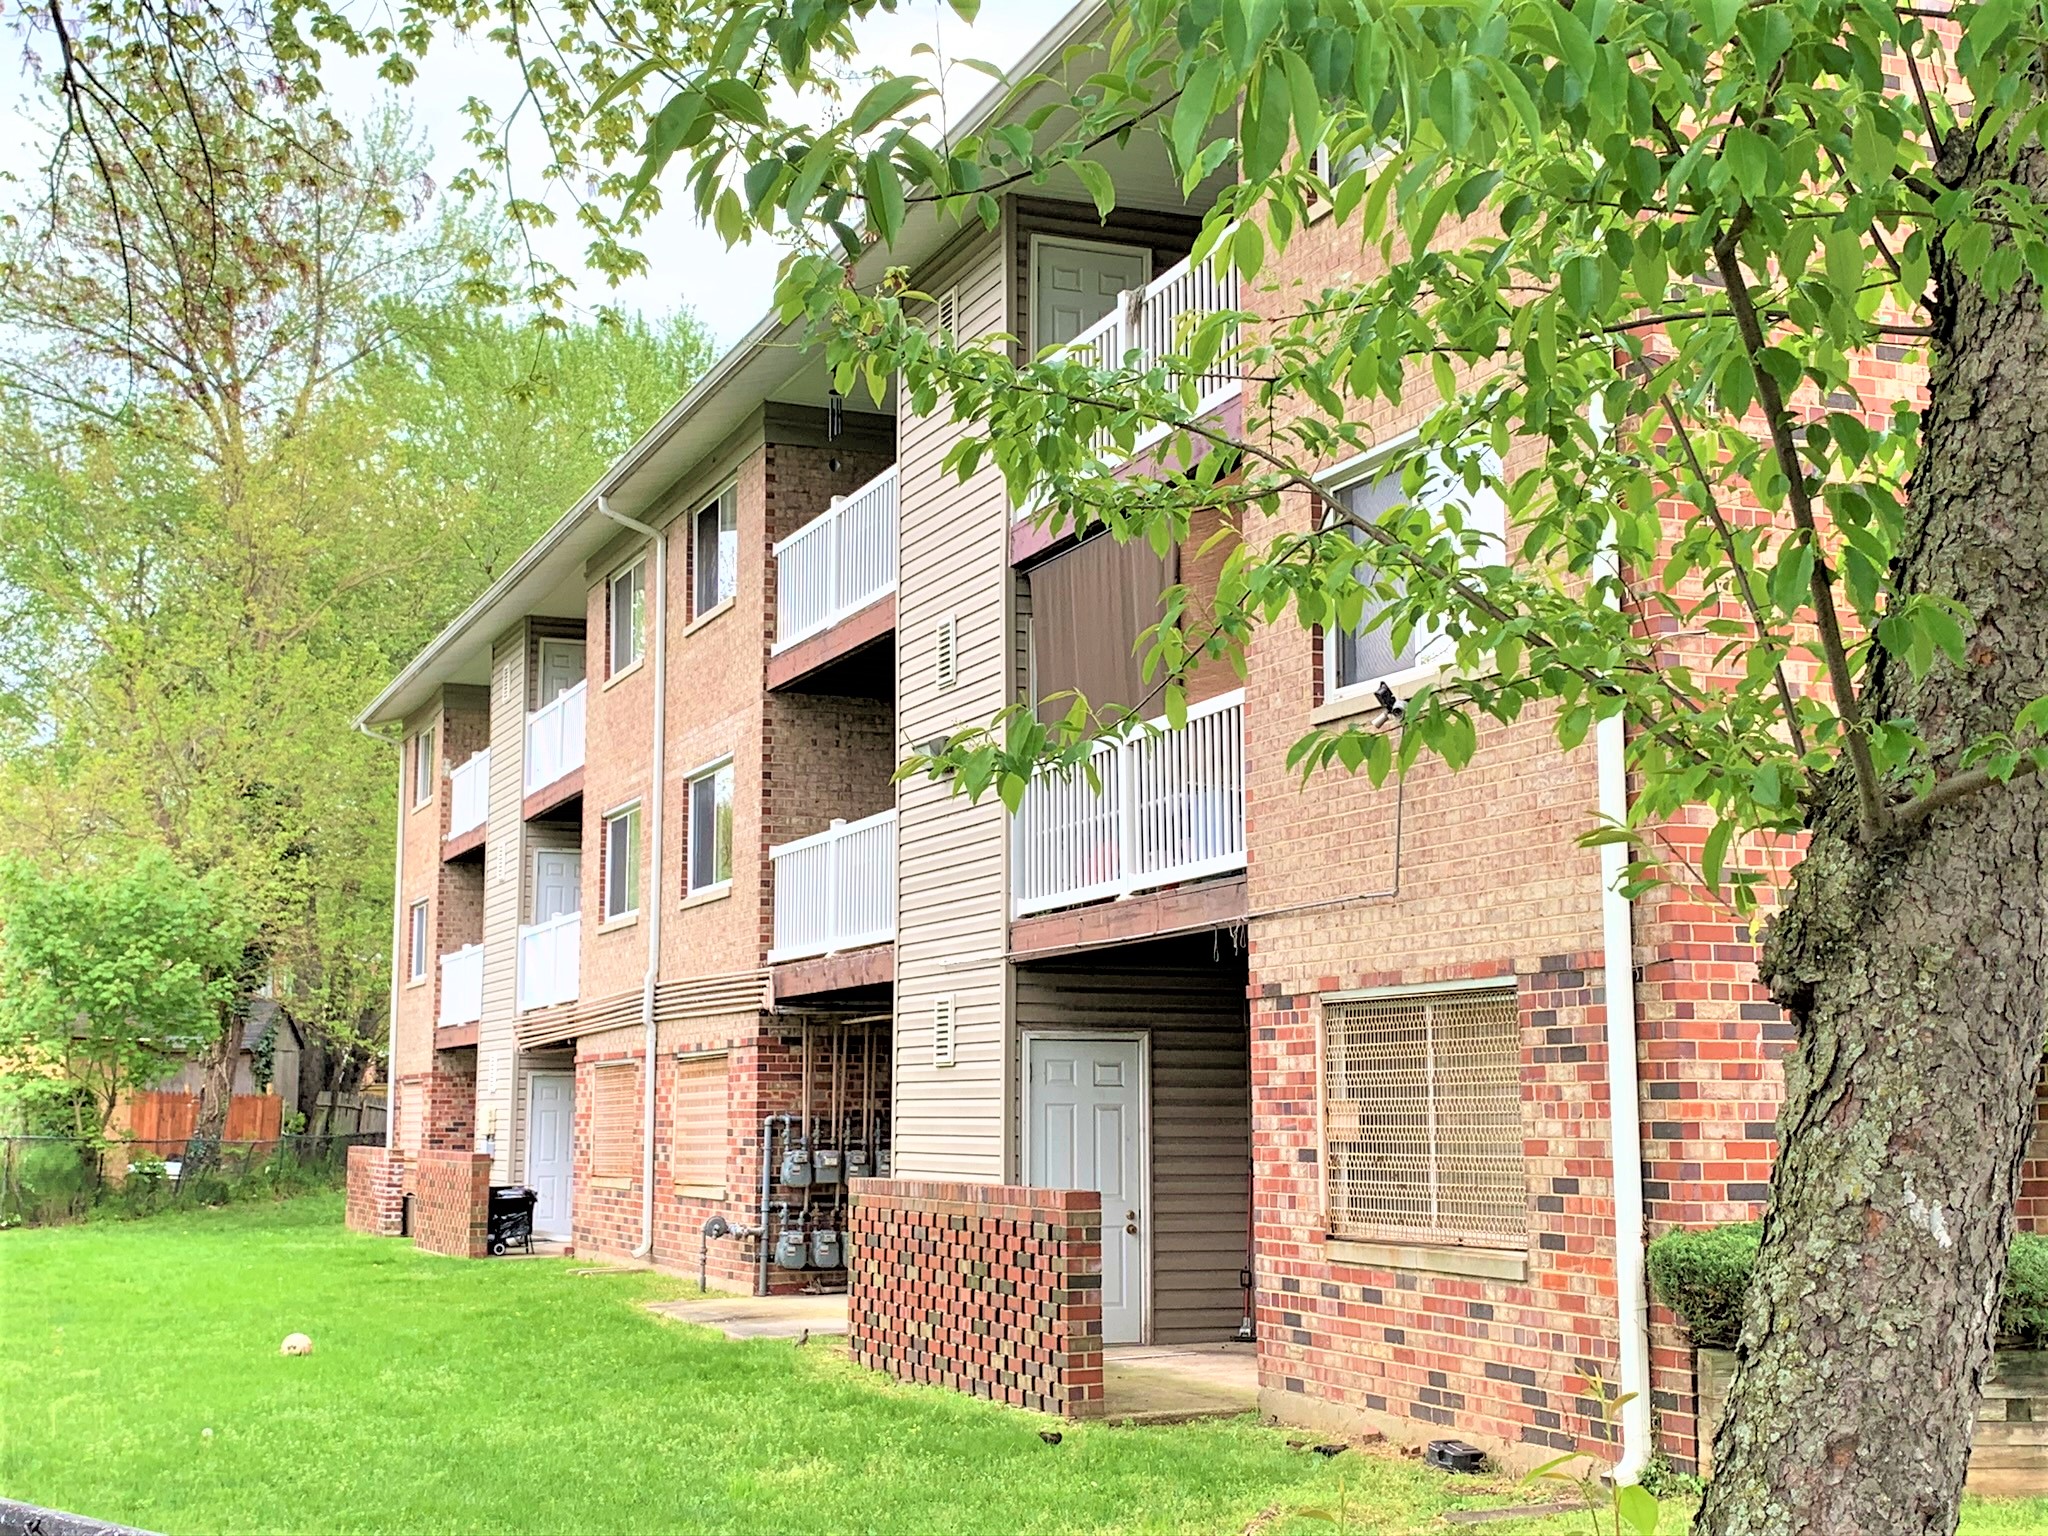 Southern Terrace Apartments in Oxon Hill, MD